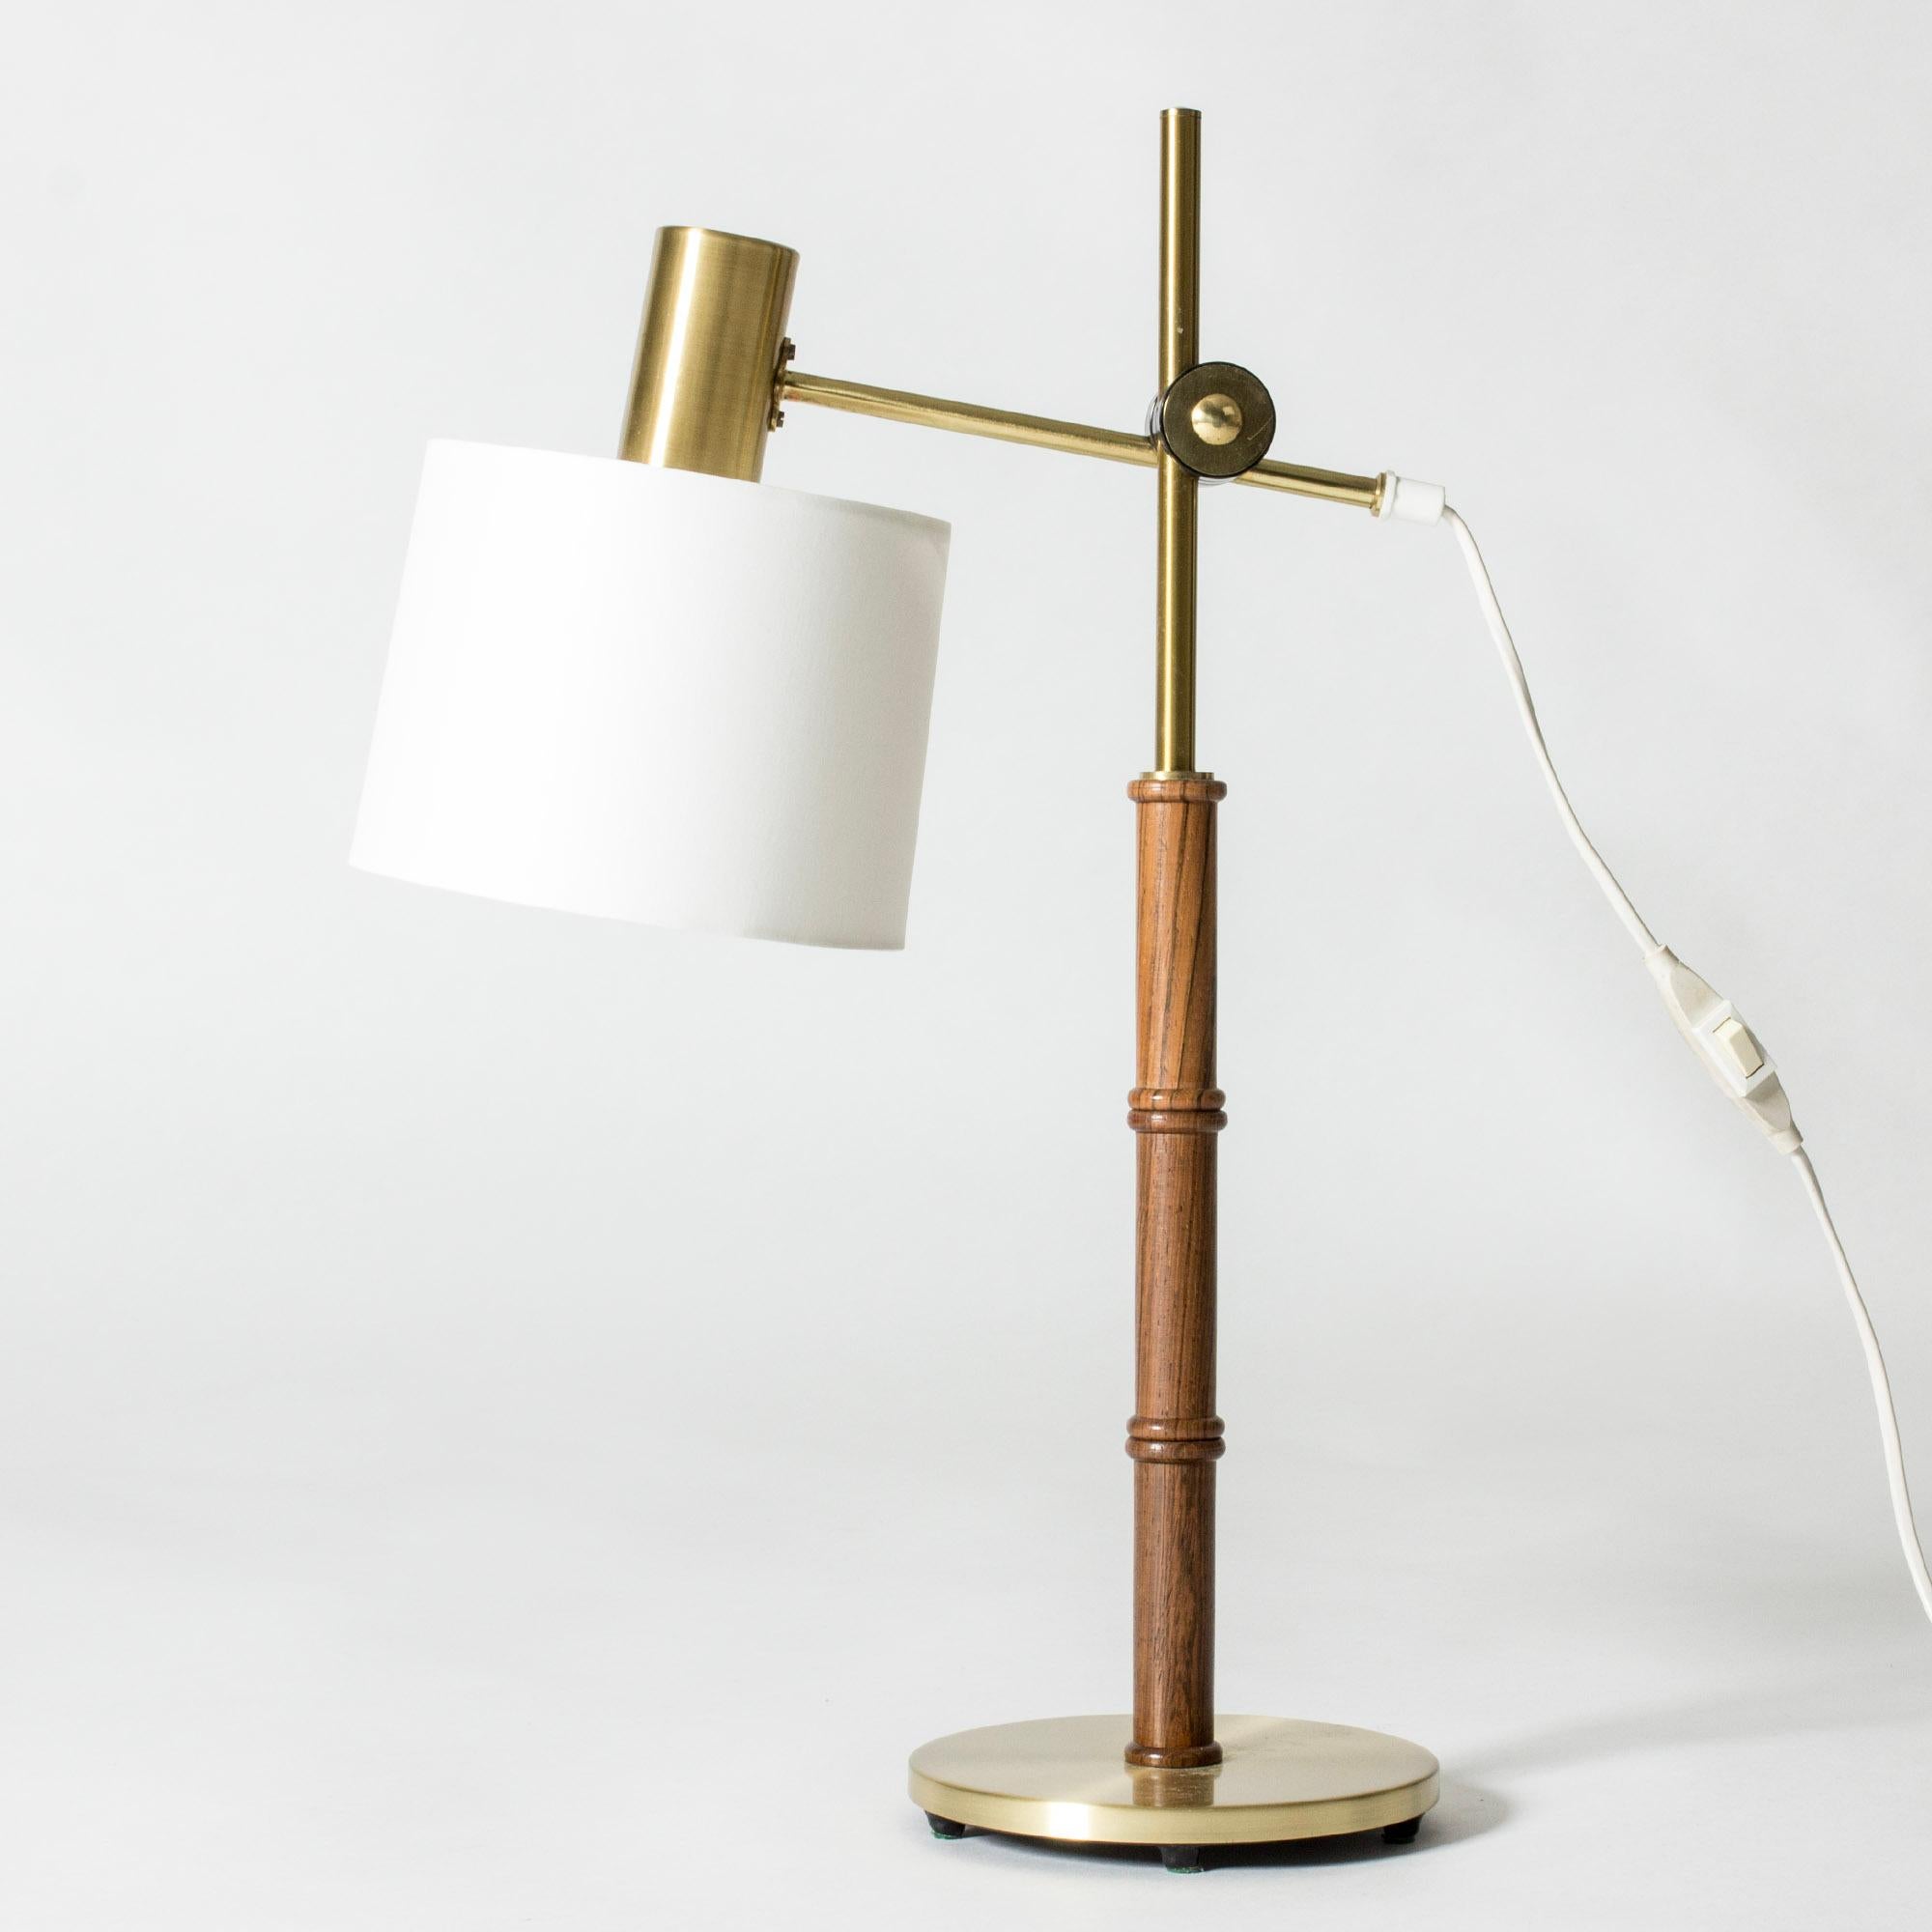 Cool table lamp from Falkenbergs Belysning, made from brass with a rosewood stem. Wood carved into a bamboo-stem form. Adjustable height and angle of the shade.